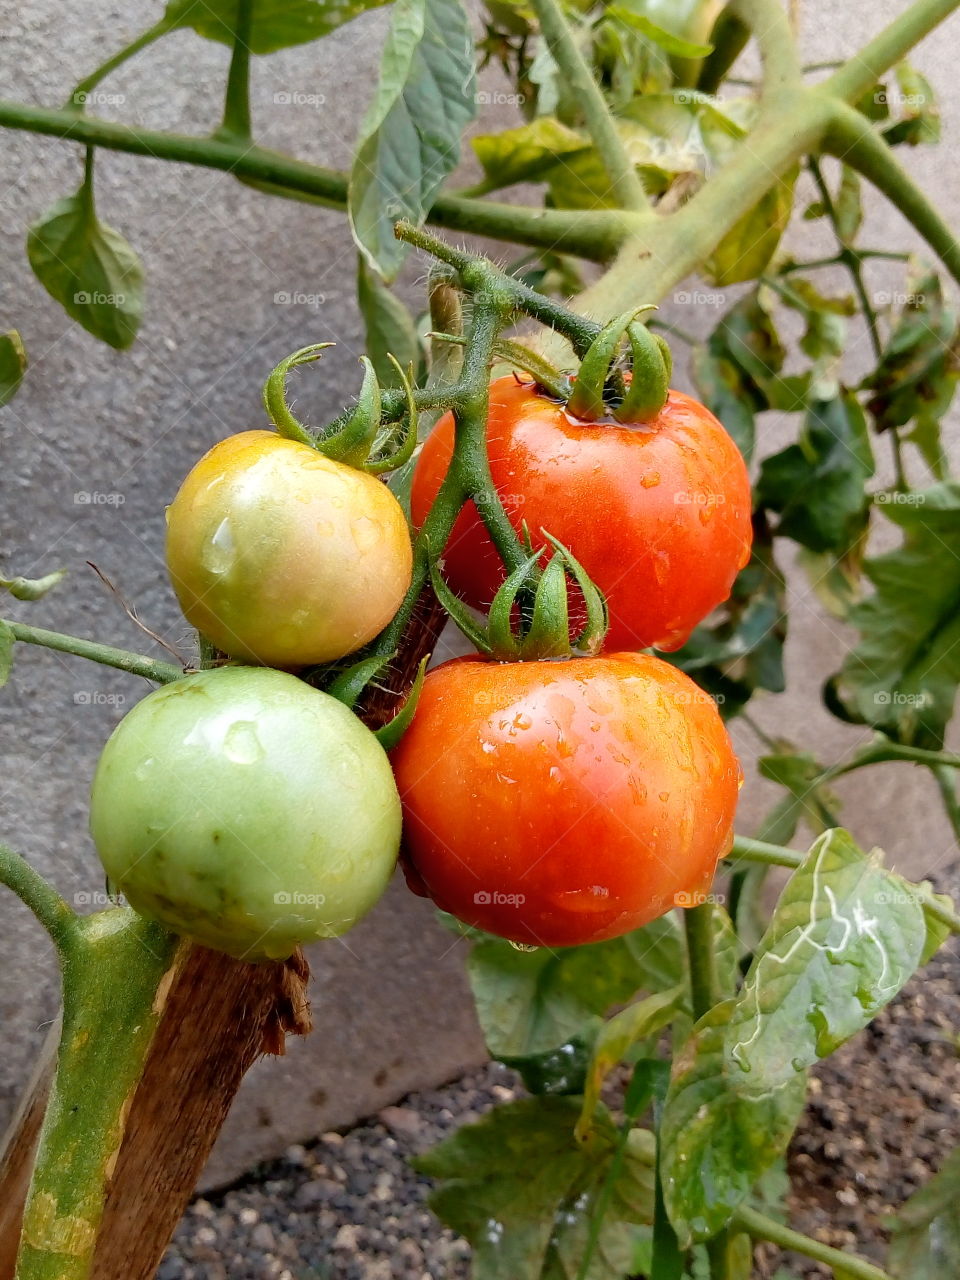 Tomato fruits formation on